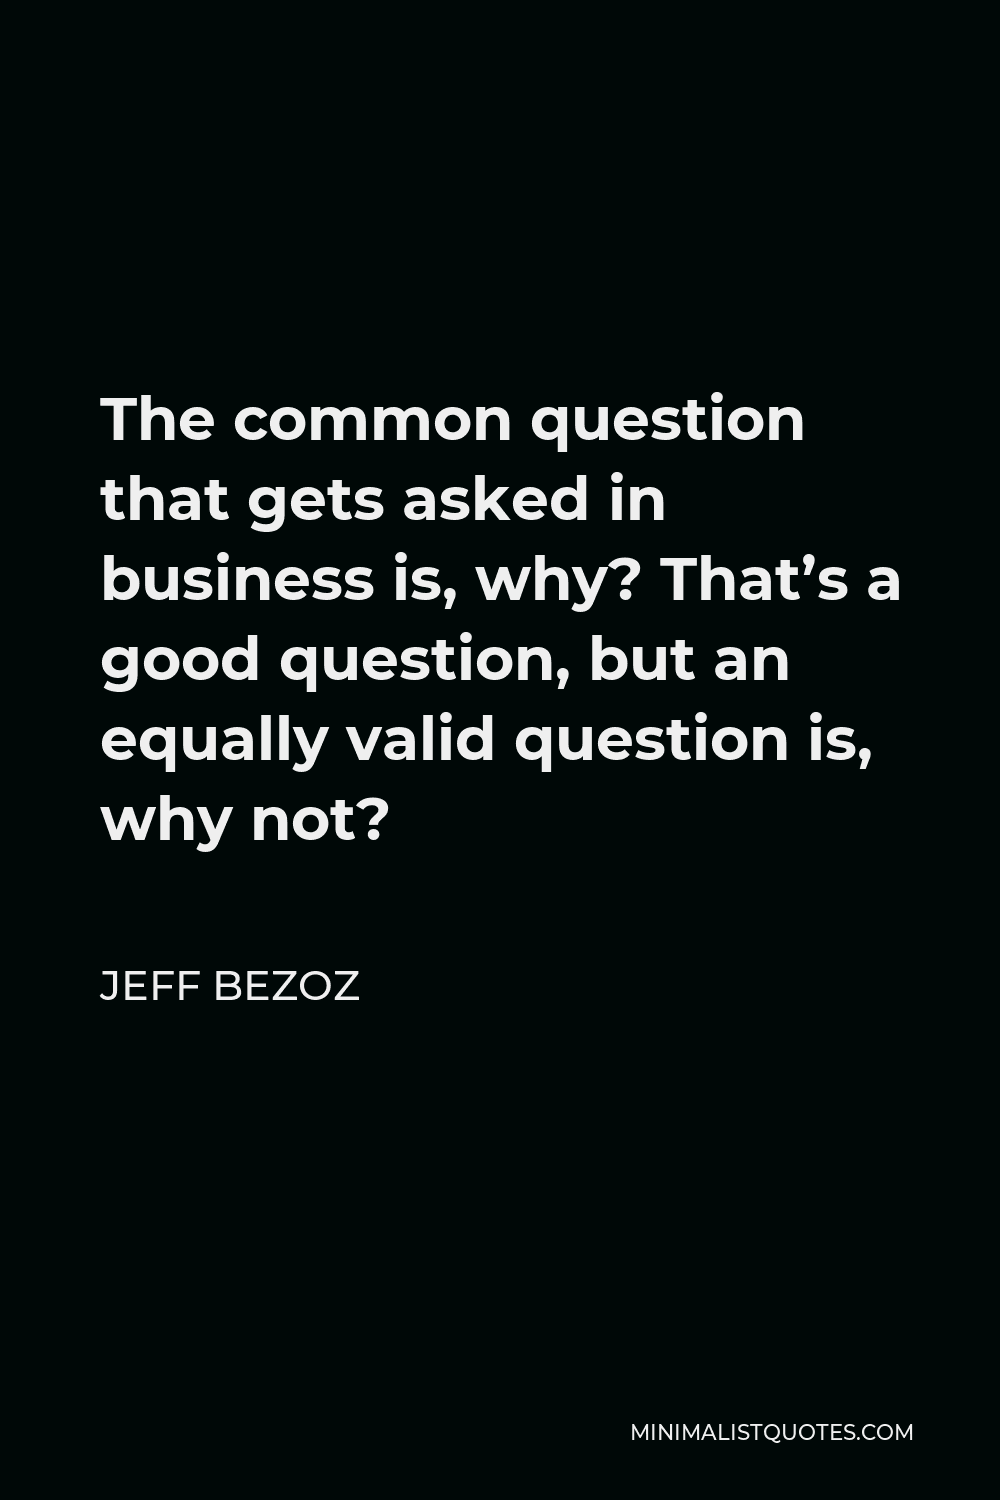 Jeff Bezoz Quote - The common question that gets asked in business is, why? That’s a good question, but an equally valid question is, why not?